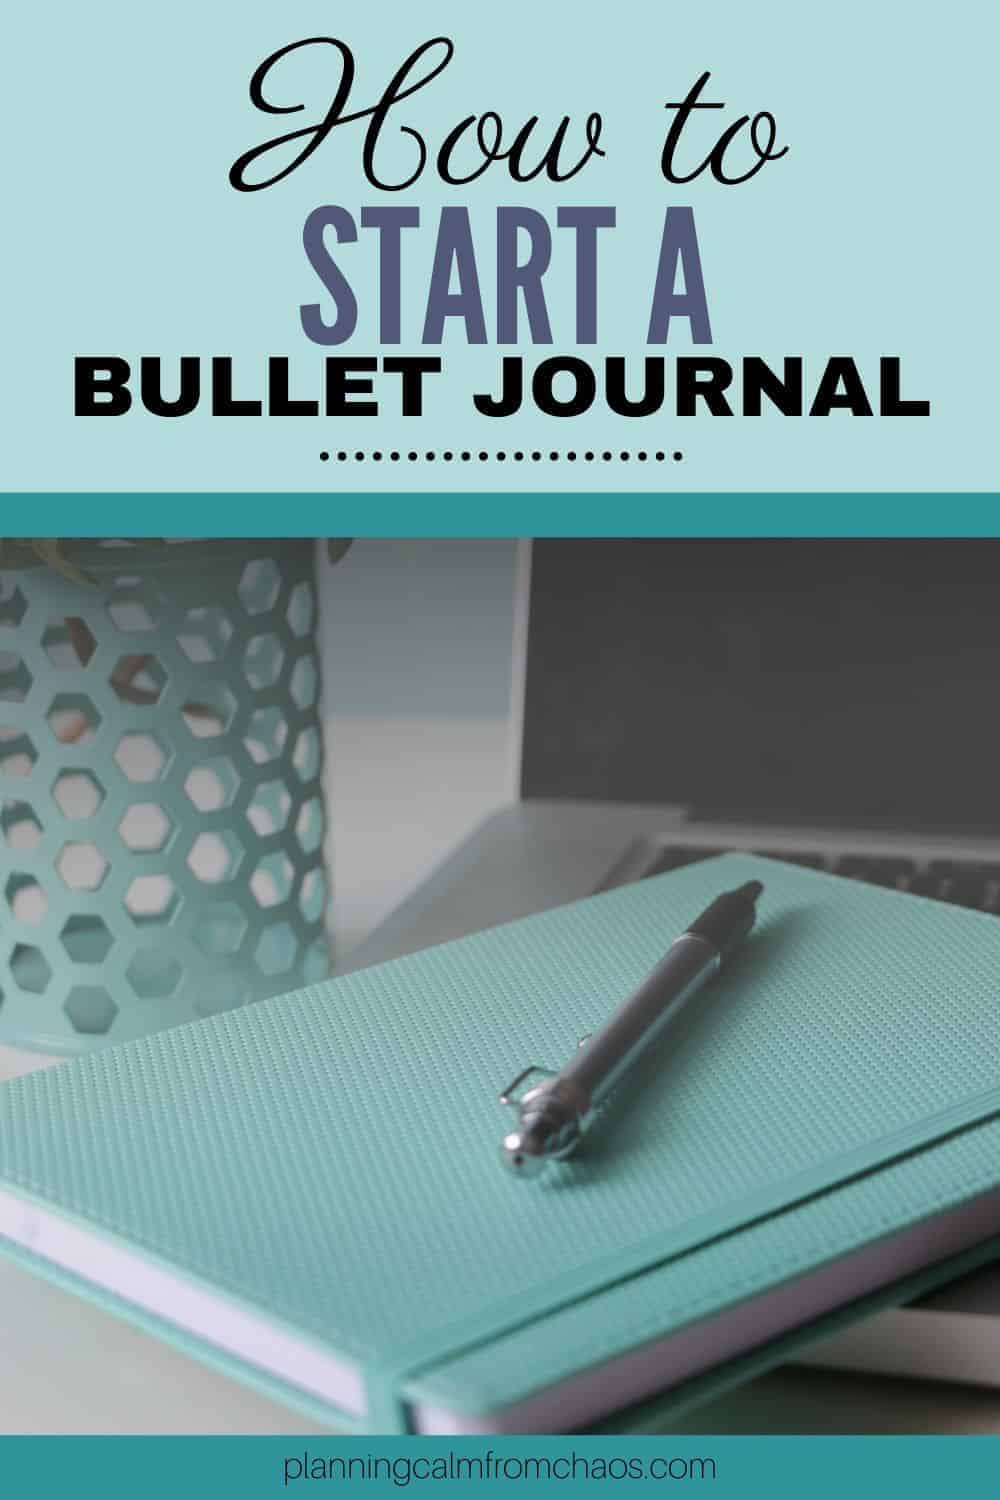 How to Start a Bullet Journal - Planning Calm From Chaos